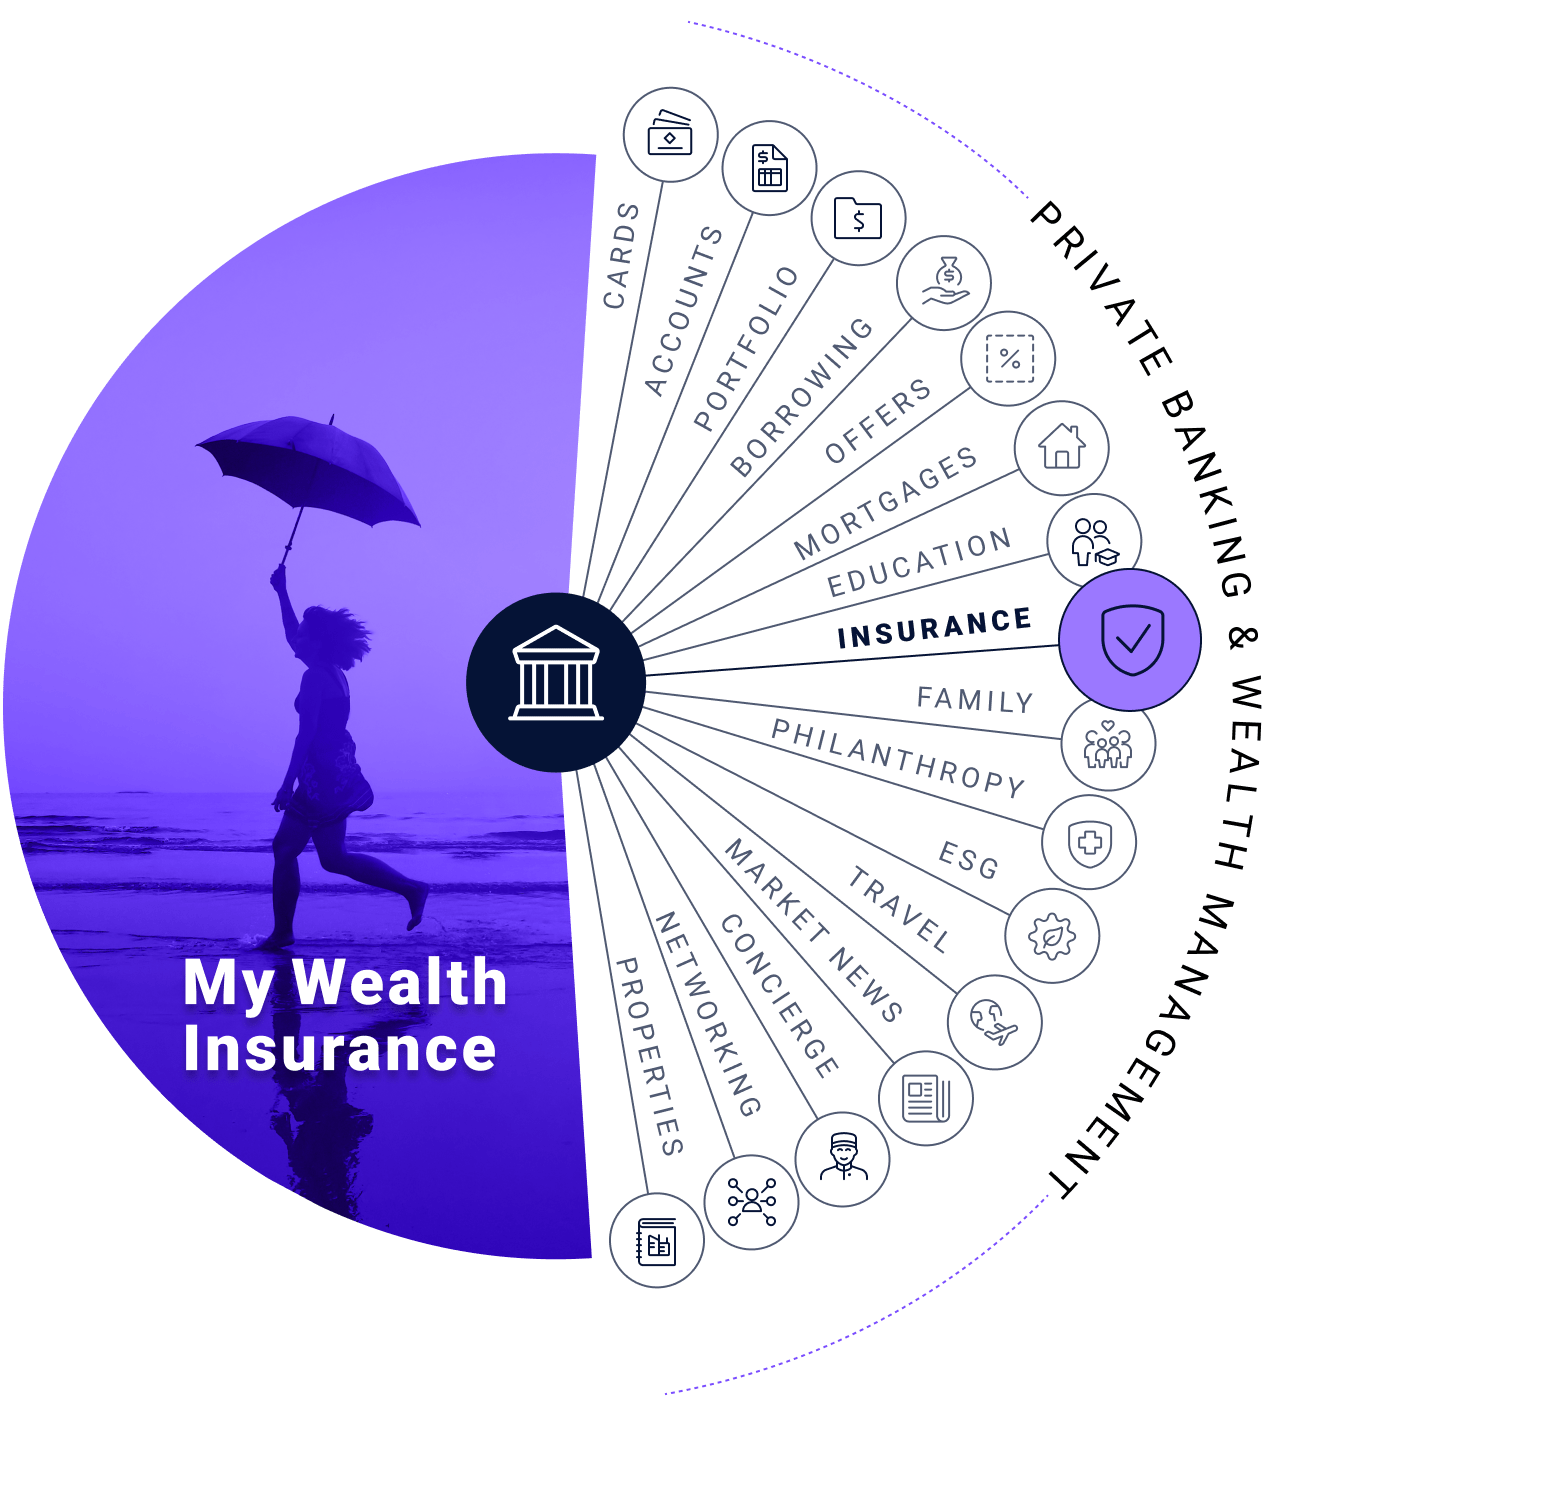 My Wealth insurance: cards, accounts, portfolio, borrowing, offers, mortgages, education, insurance, family, philanthropy, esg, travel, market news, concierge, networking, and properties